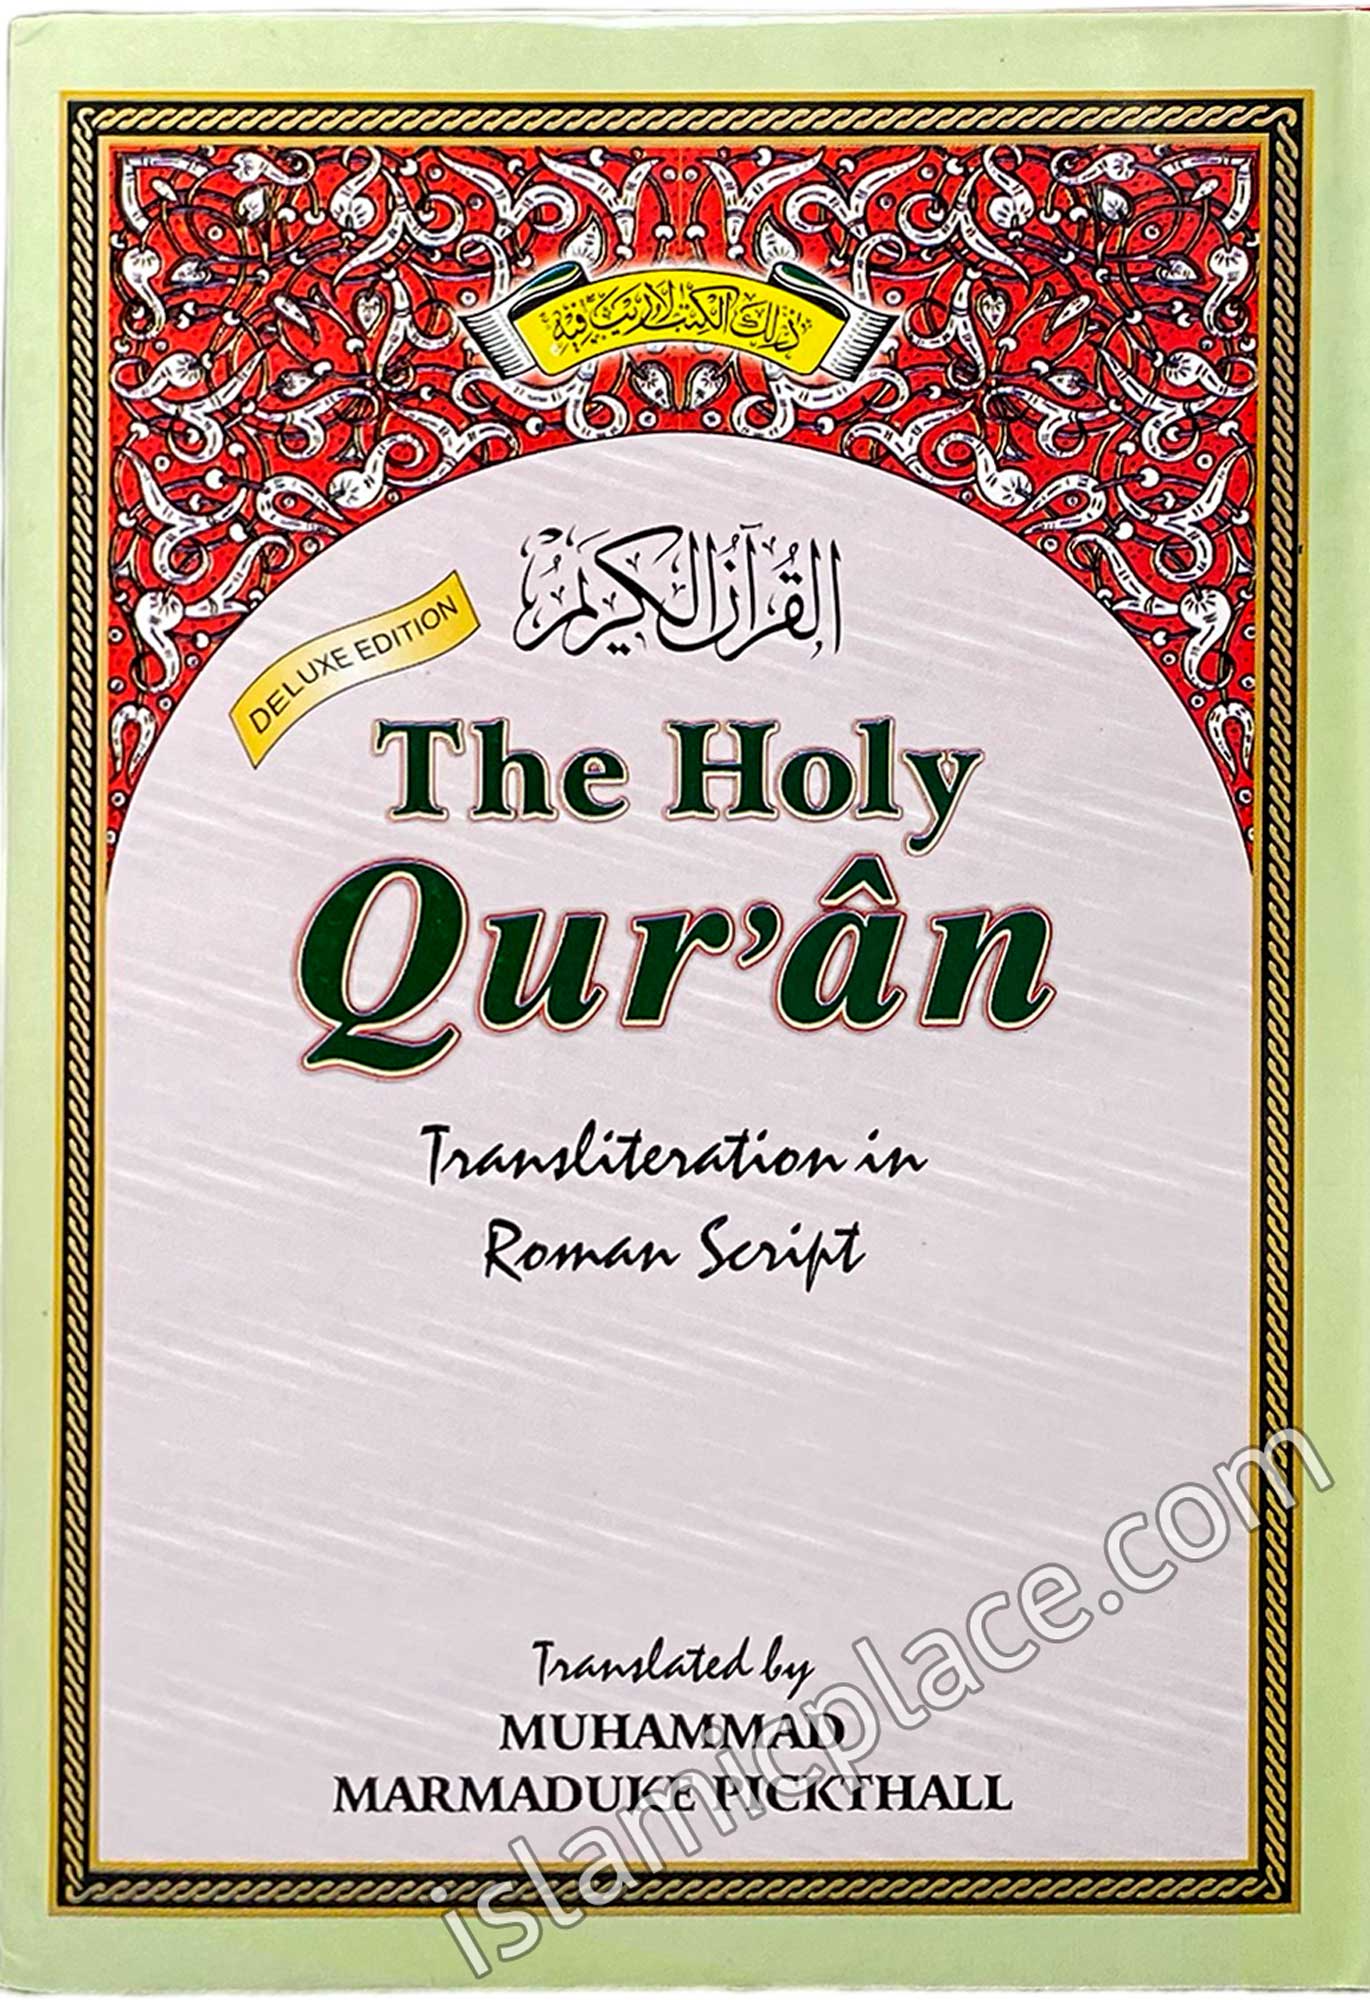 The Holy Qur'an (Transliteration Large size) Pickthall